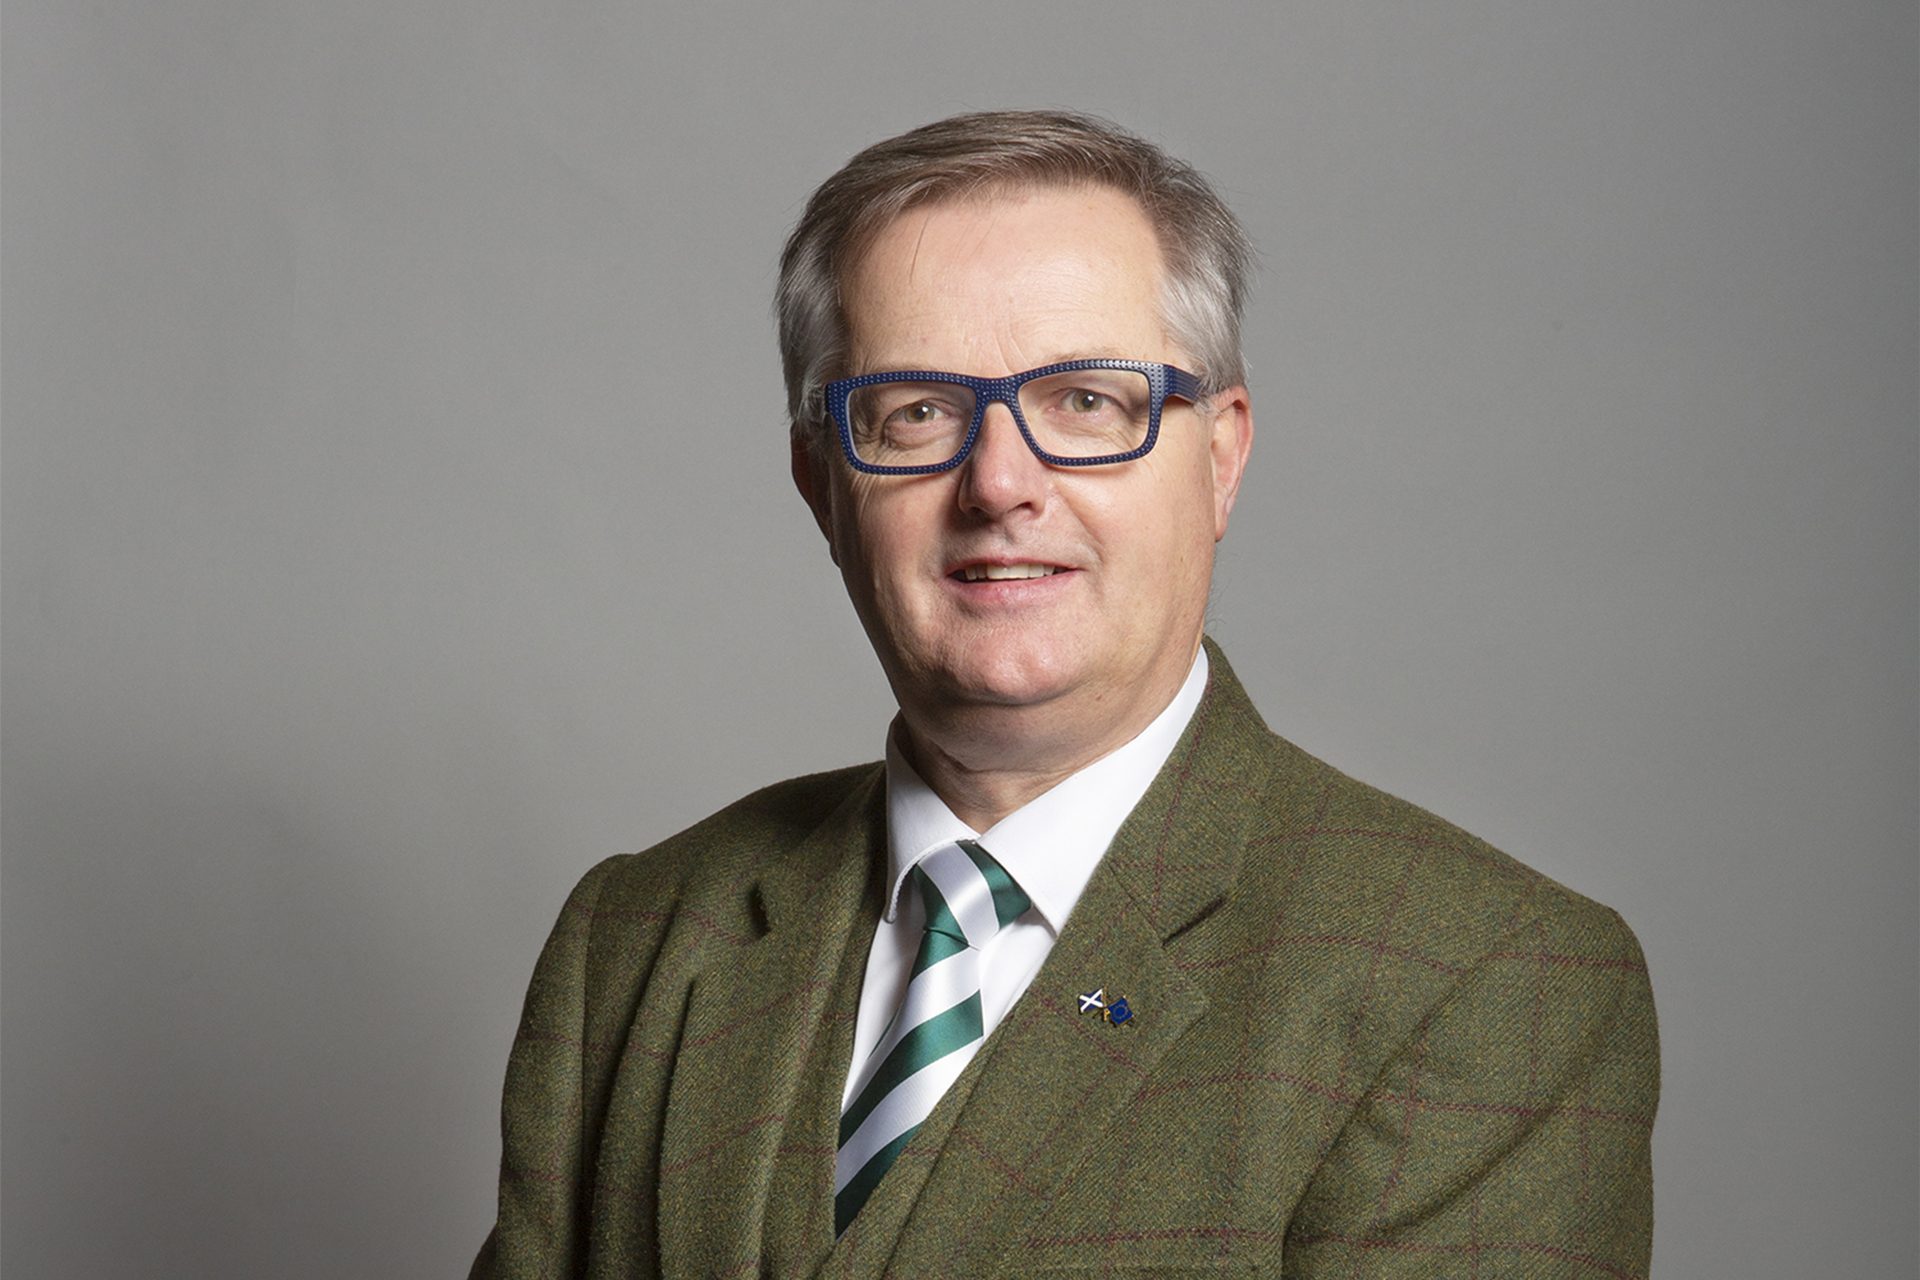 Brendan O'Hara is the SNP MP for Argyll and Bute and the party's chief whip in the House of Commons.